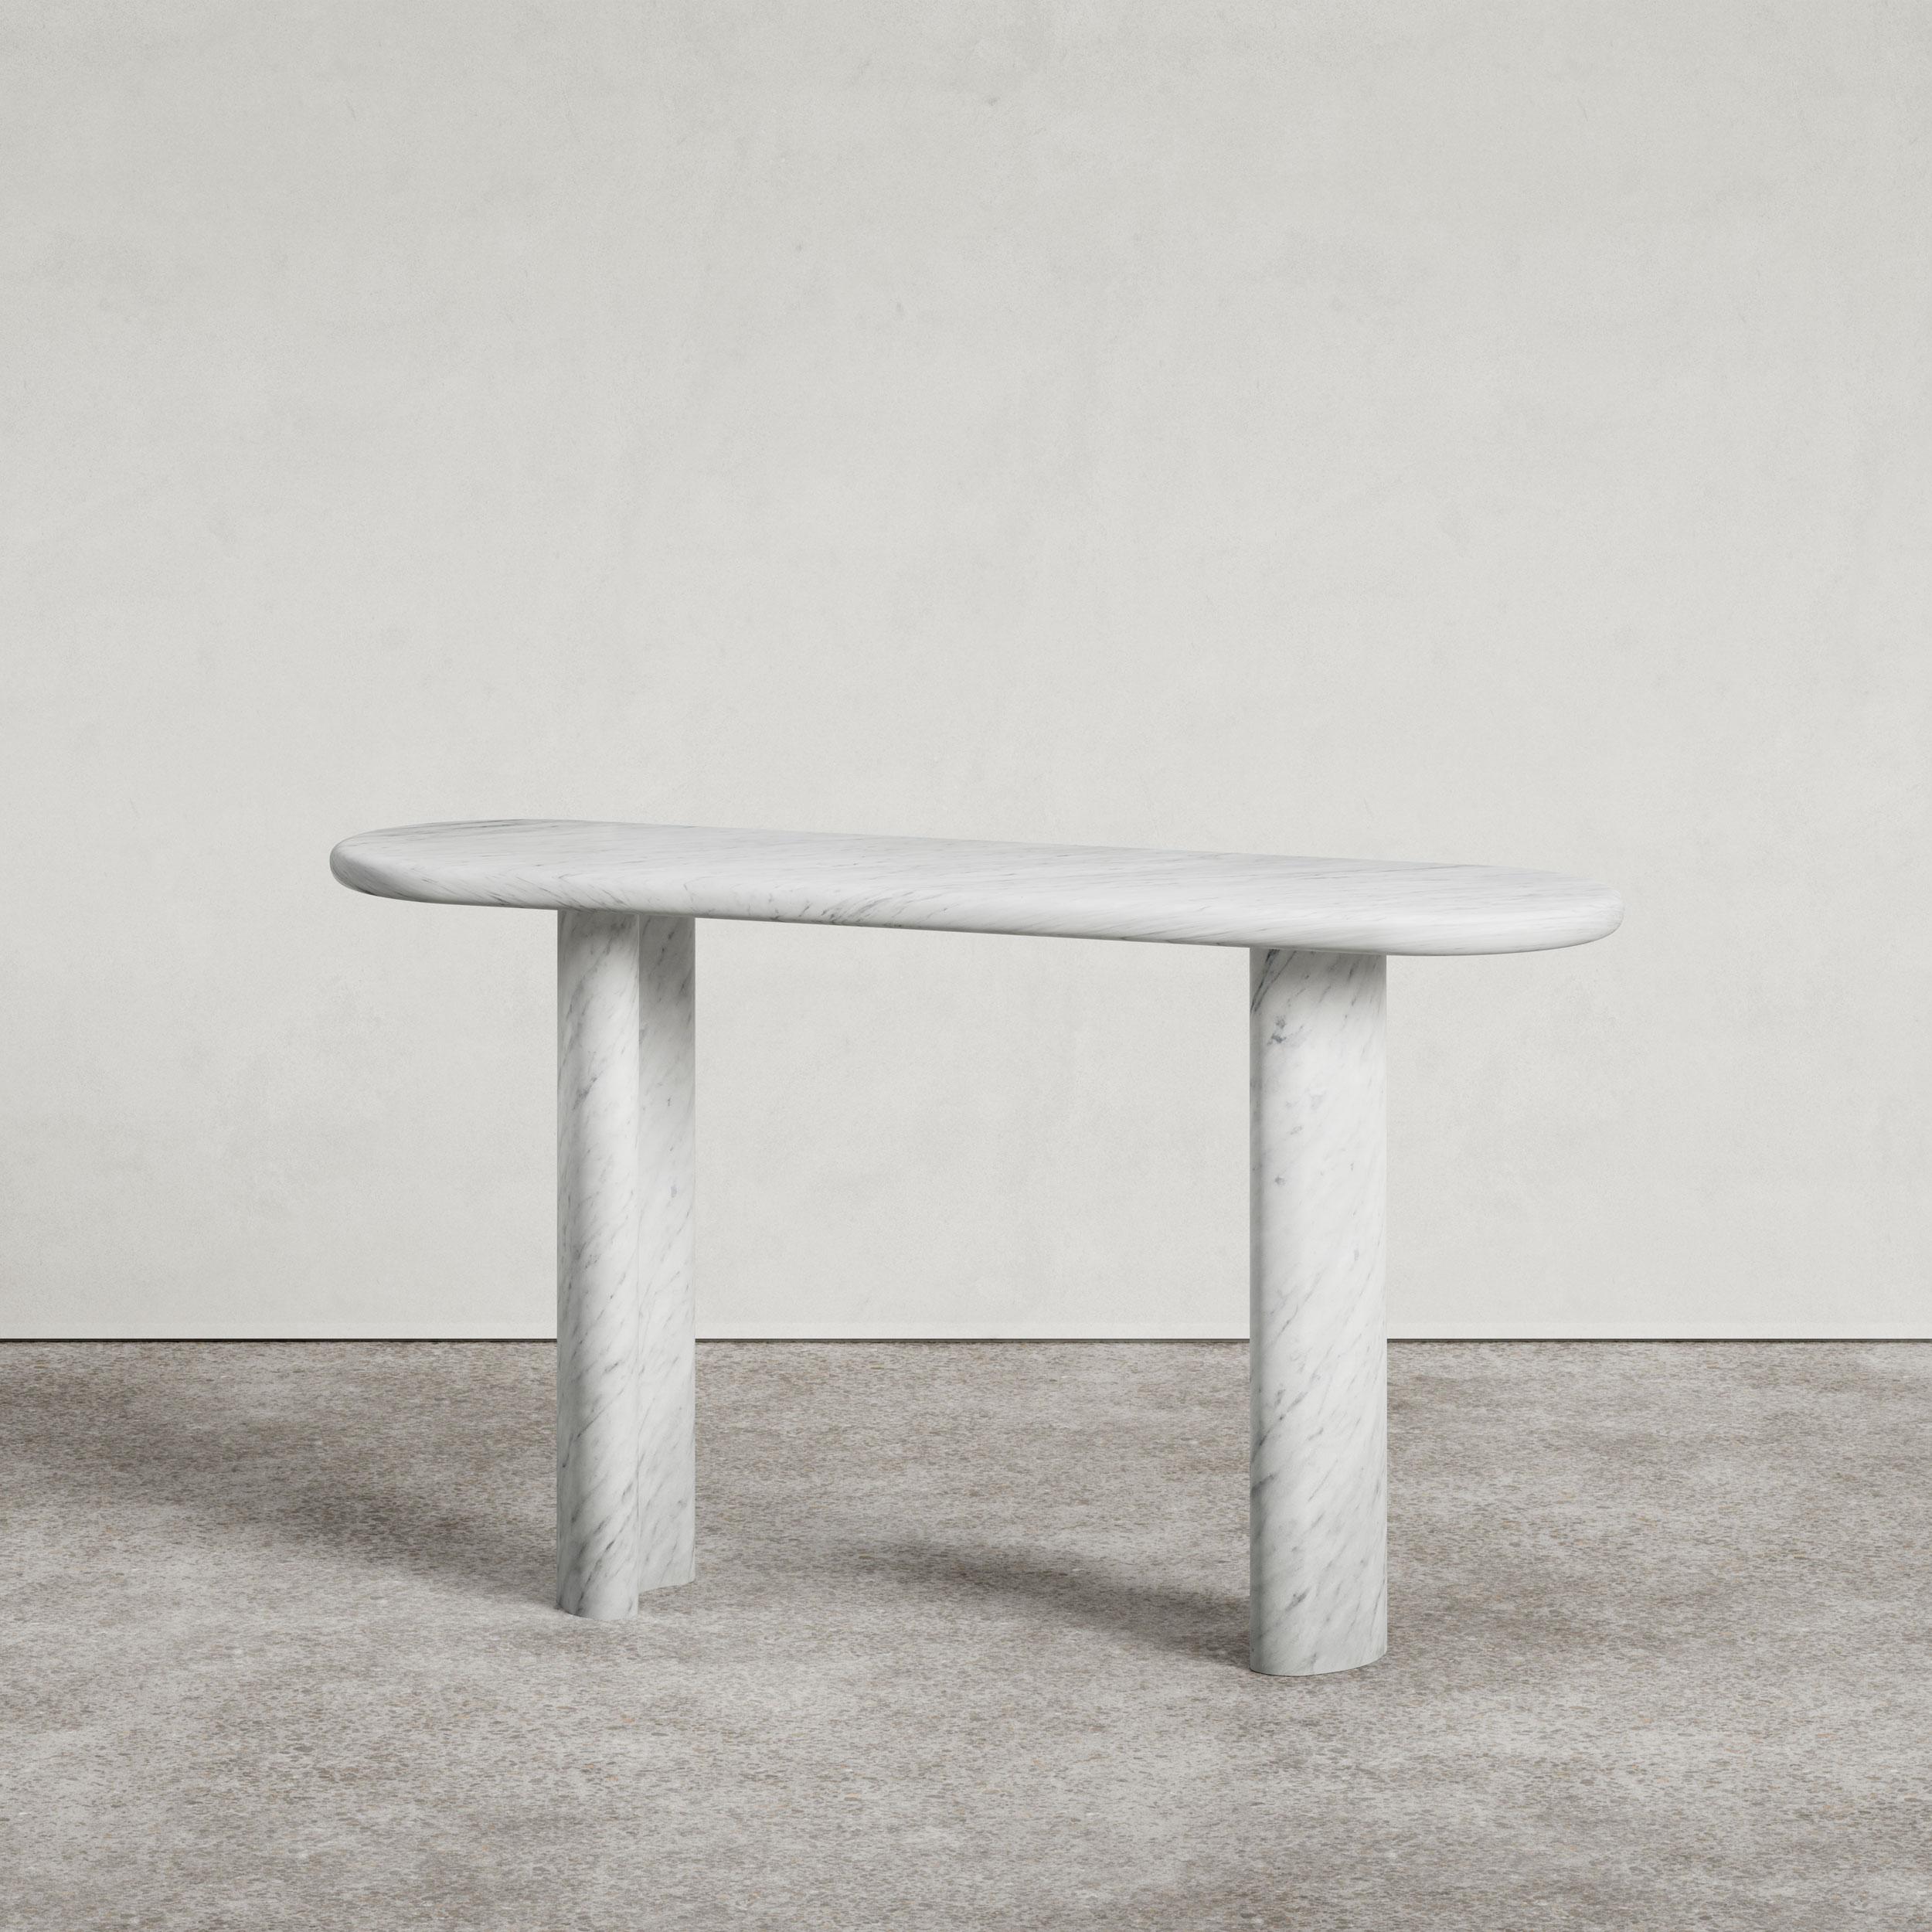 Introducing the Pietra Console; a new addition to the Pietra collection.

Designed by Just Adele. This design is carved from a single block of Italian natural stone to create organic curves and kidney-shaped legs. Available in Viola Monet,